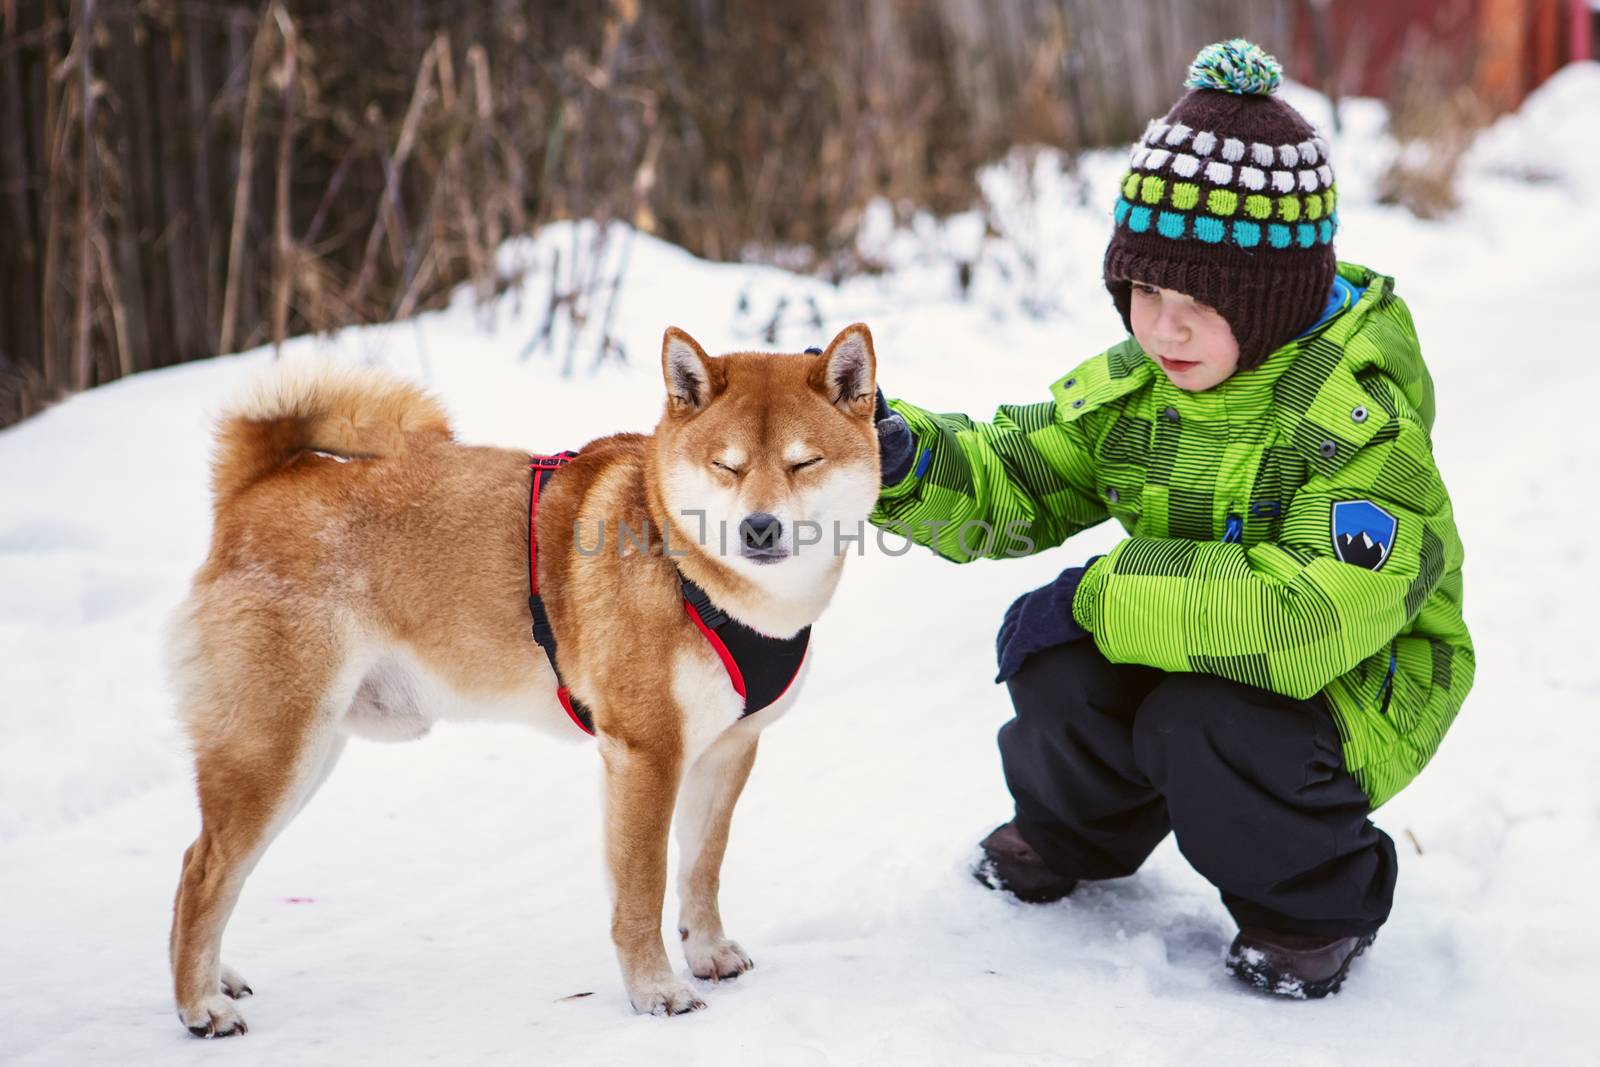 Little boy with Shiba Inu dog outdoors in the winter